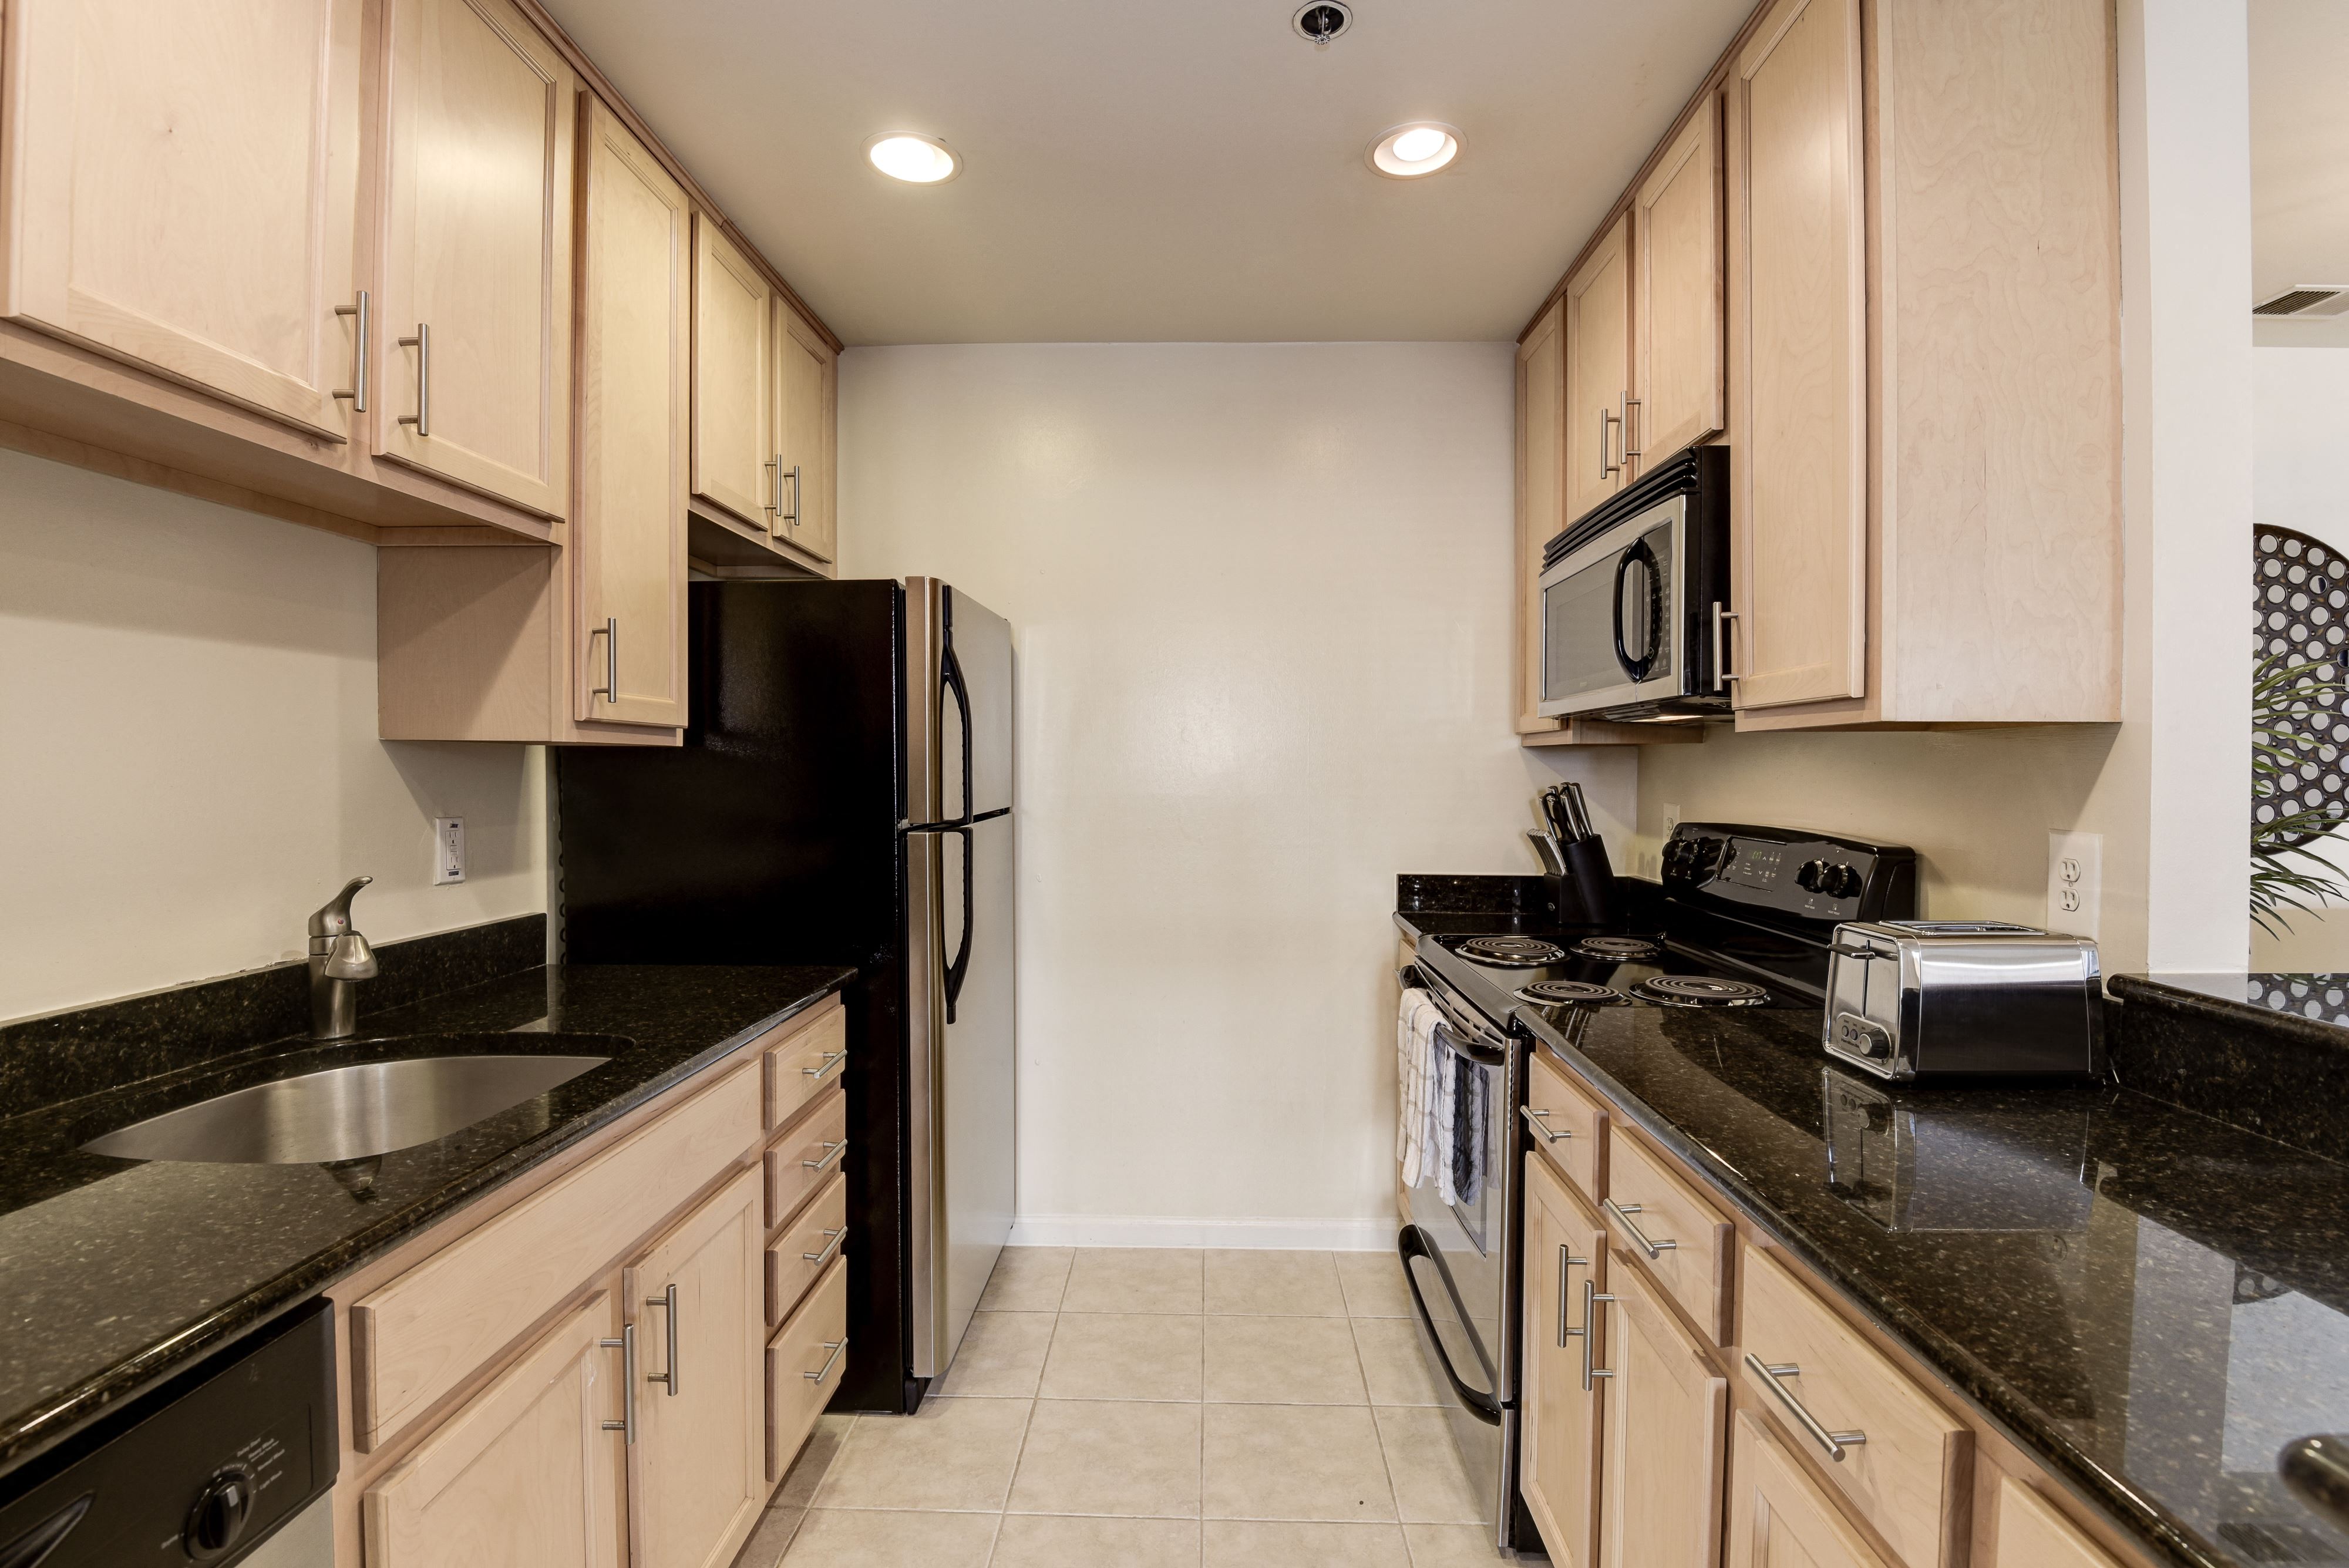 Fully equipped kitchens with recessed lighting